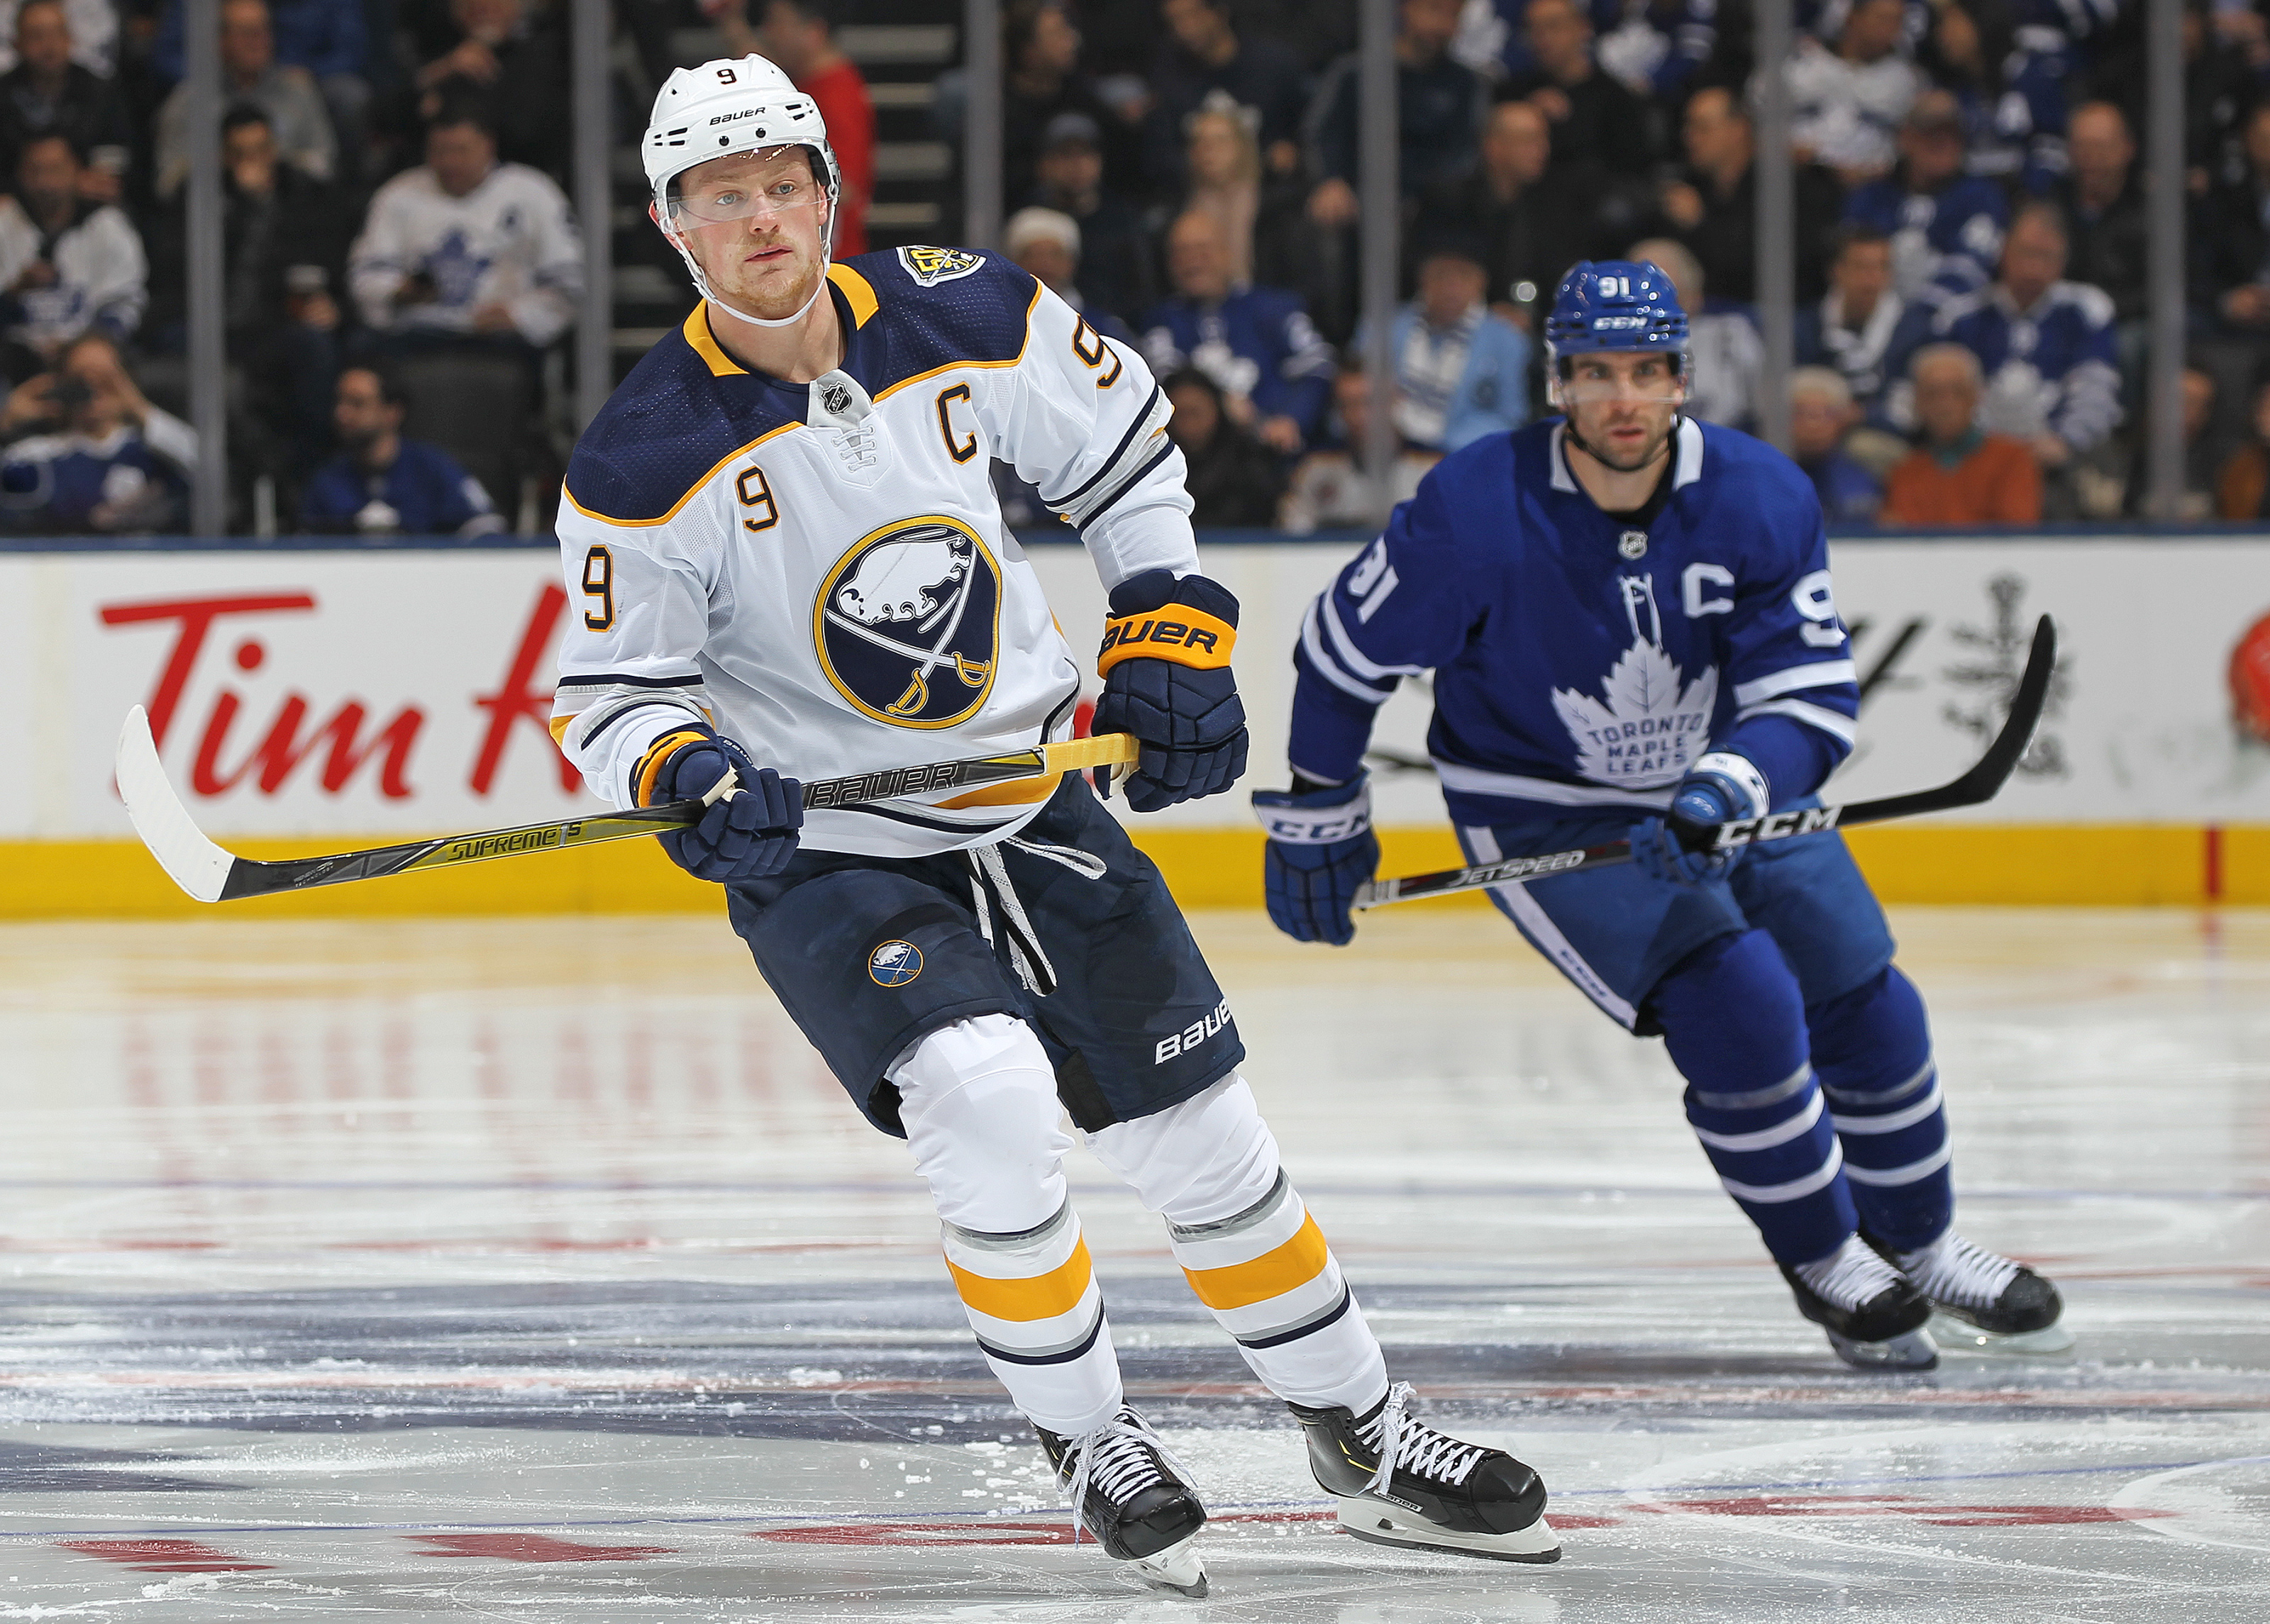 Sabres news: Sabres rumored to play an outdoor game this season